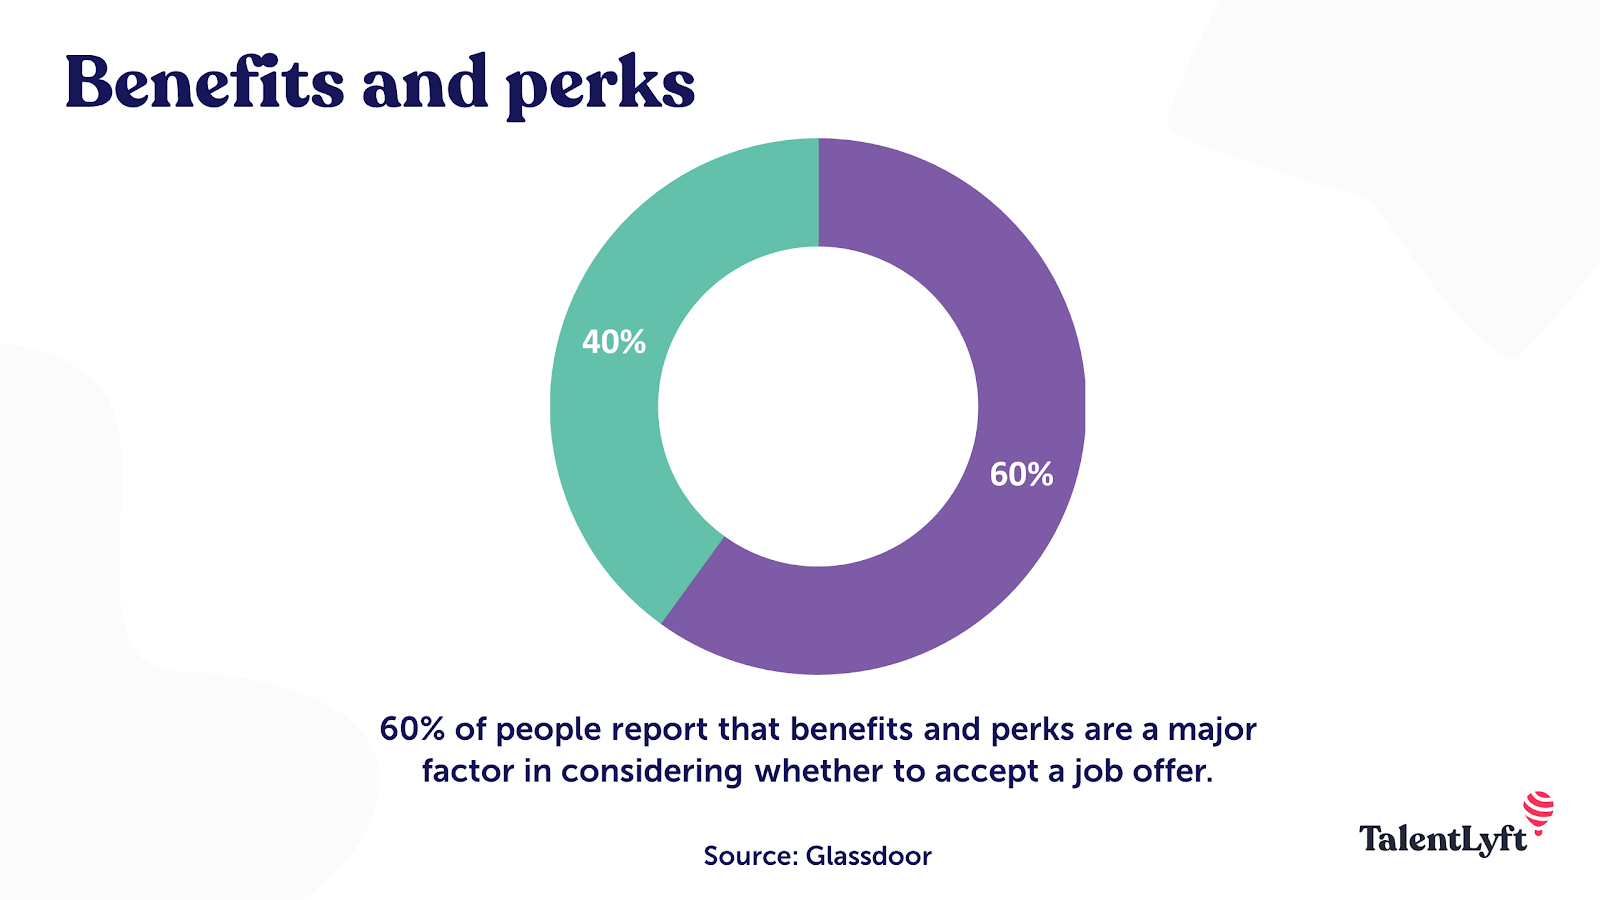 Perks and benefits